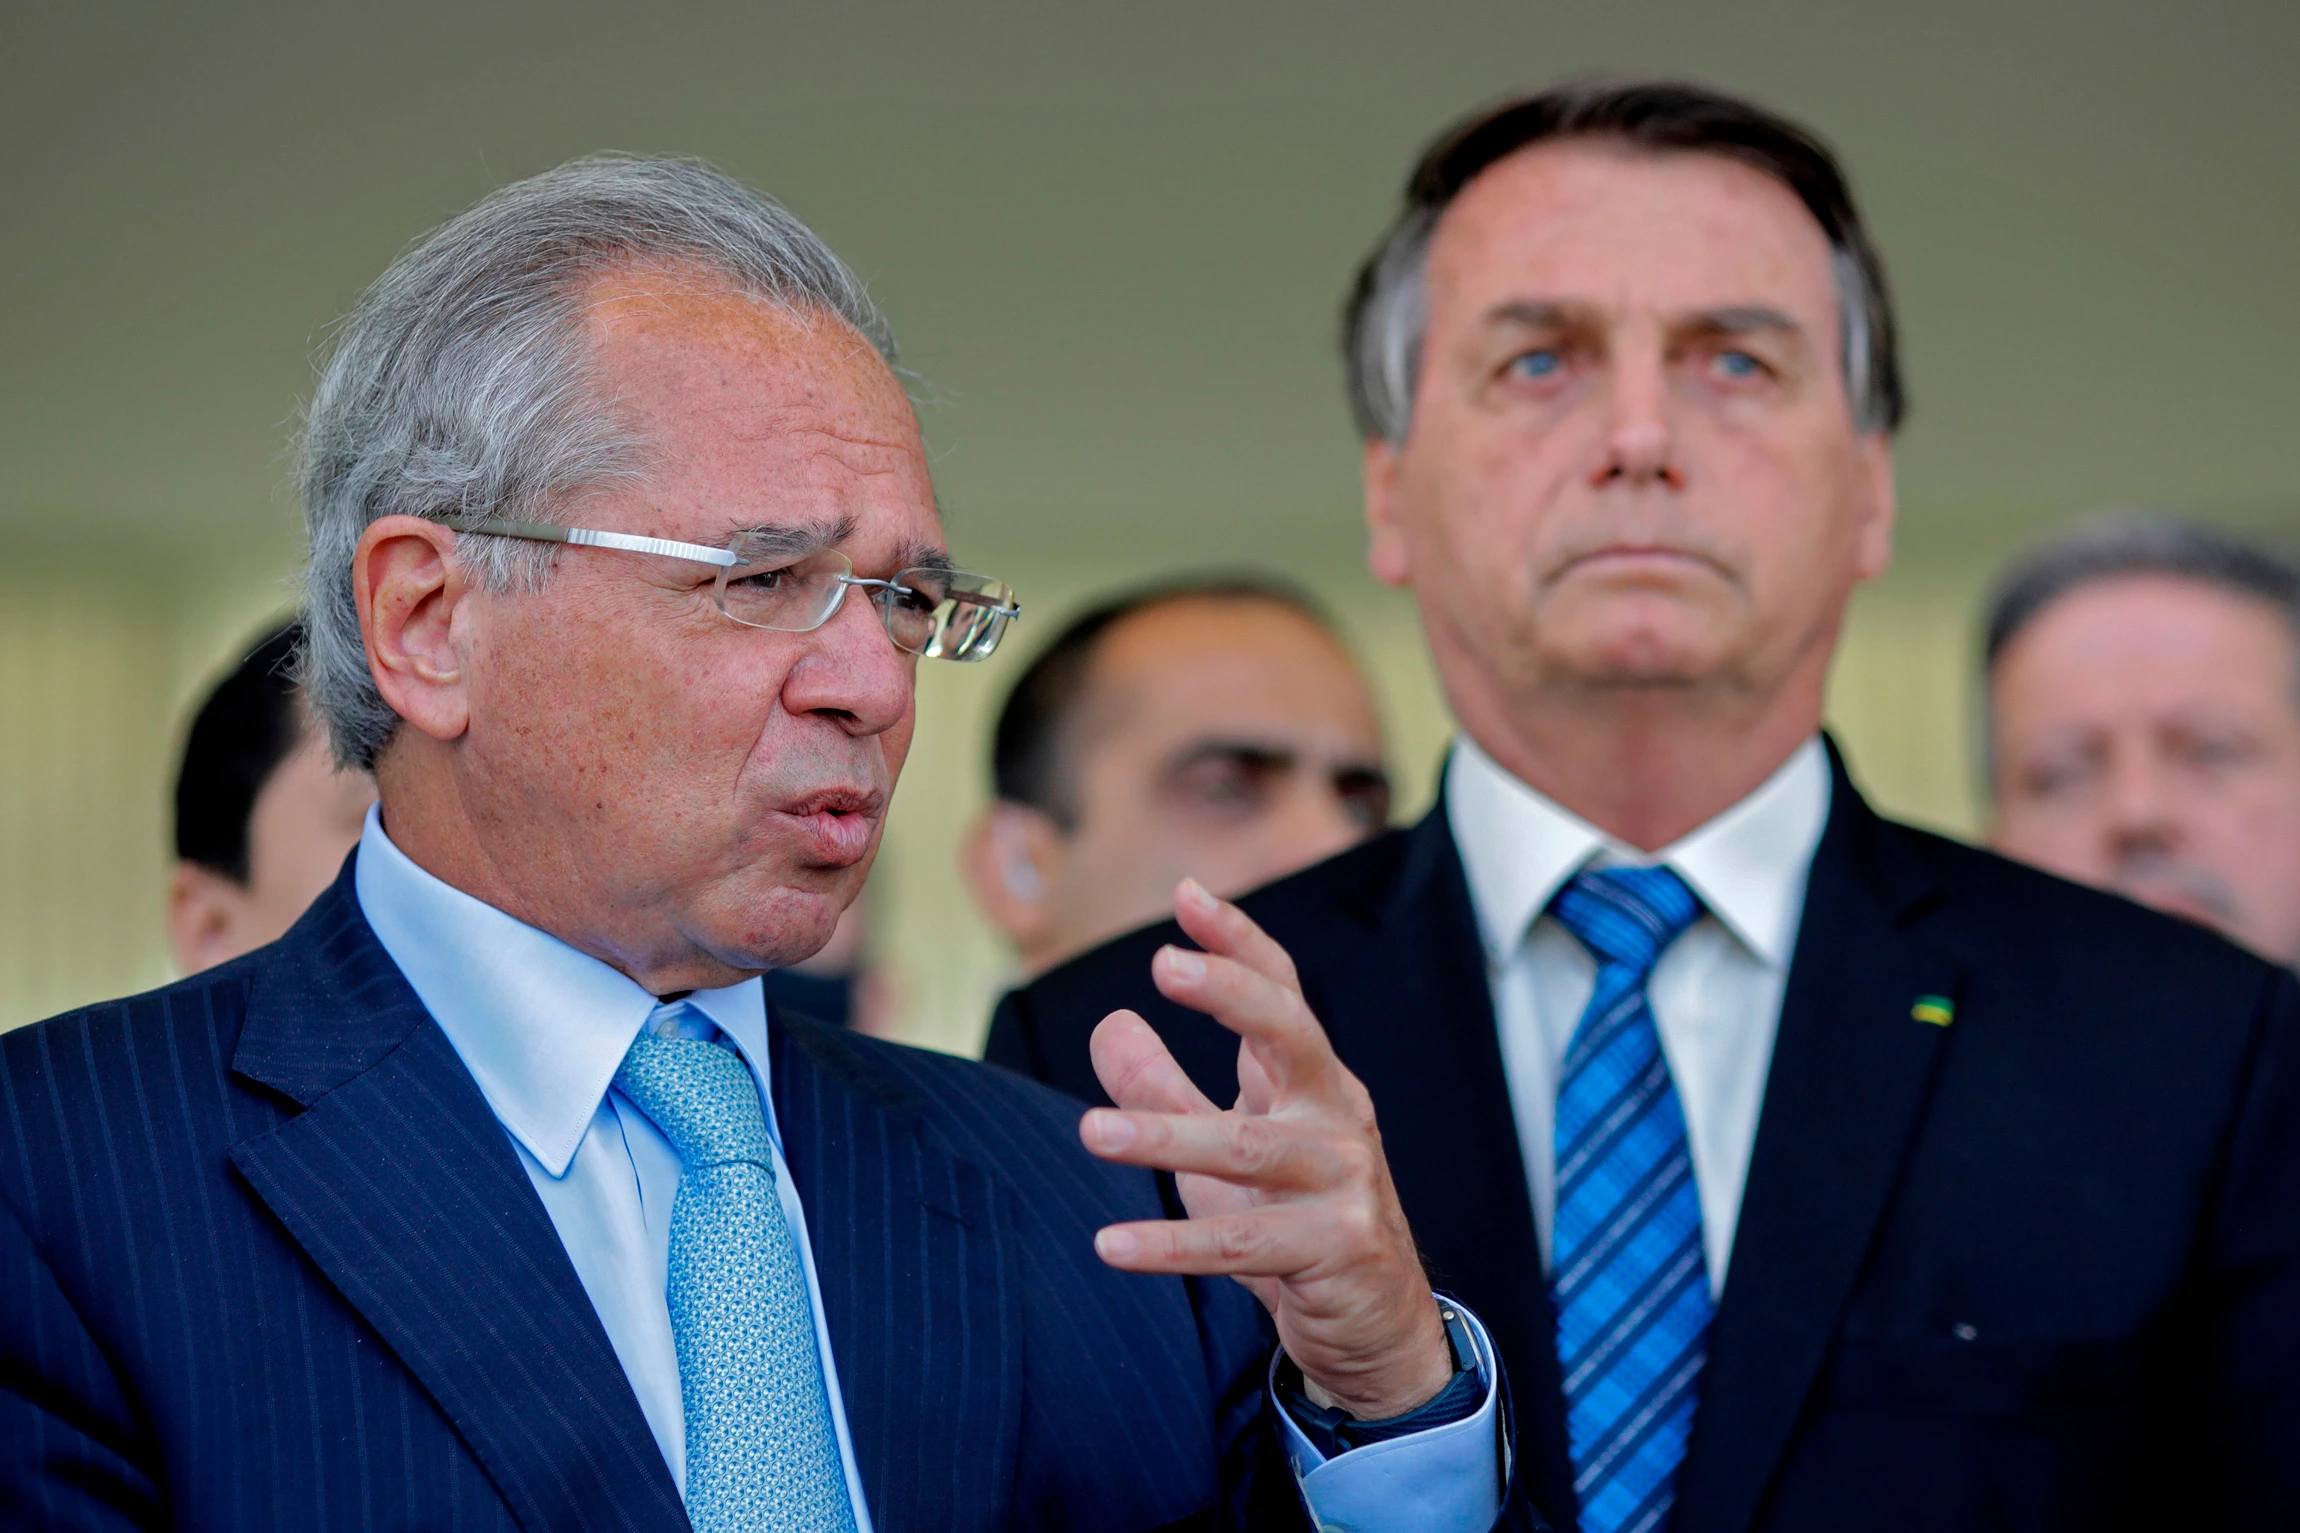 Brazilian Economy Minister Paulo Guedes (L) speaks next to Brazilian President Jair Bolsonaro (R) during a statement on financial aid for vulnerable Brazilians amid the COVID-19 pandemic, at Planalto Palace, in Brasilia, on September 1, 2020. - Brazil announced a reduction of 9.1% in the gross domestic product. (Photo by Sergio Lima / AFP) (Photo by SERGIO LIMA/AFP via Getty Images)